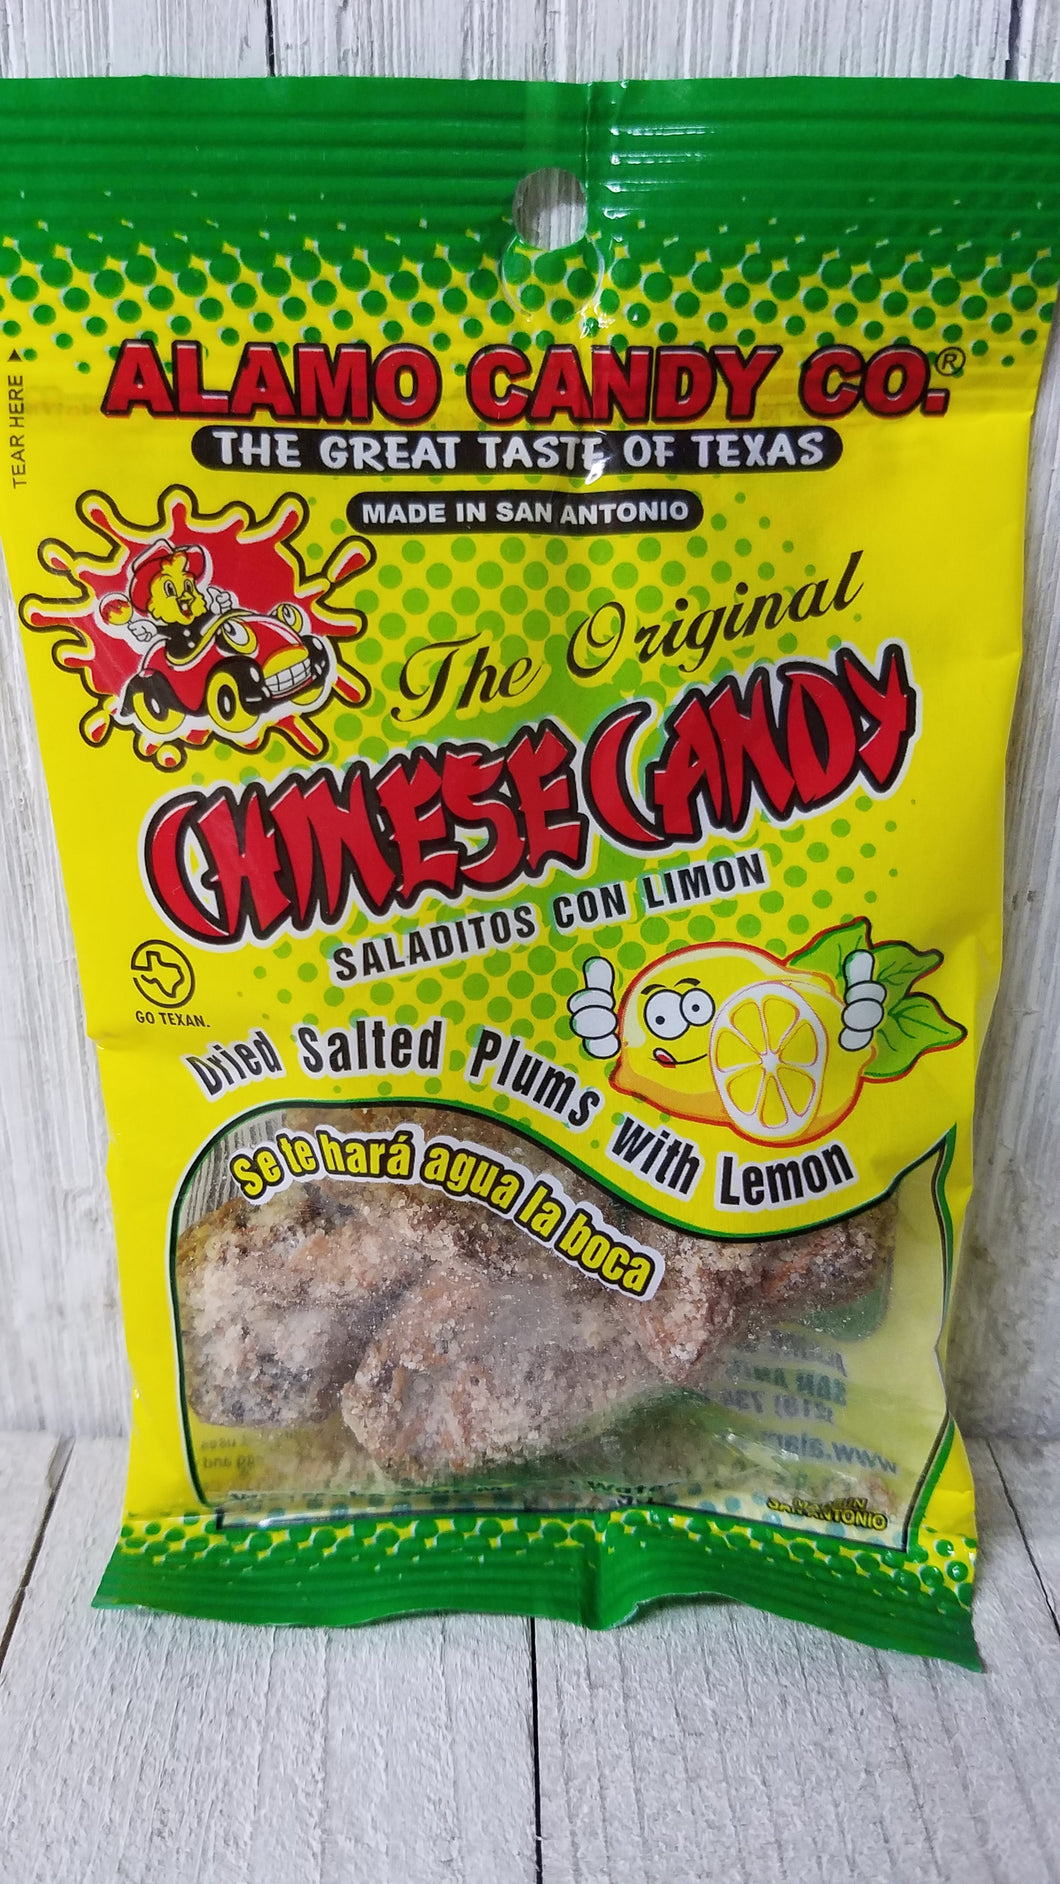 Chinese Candy with Lemon